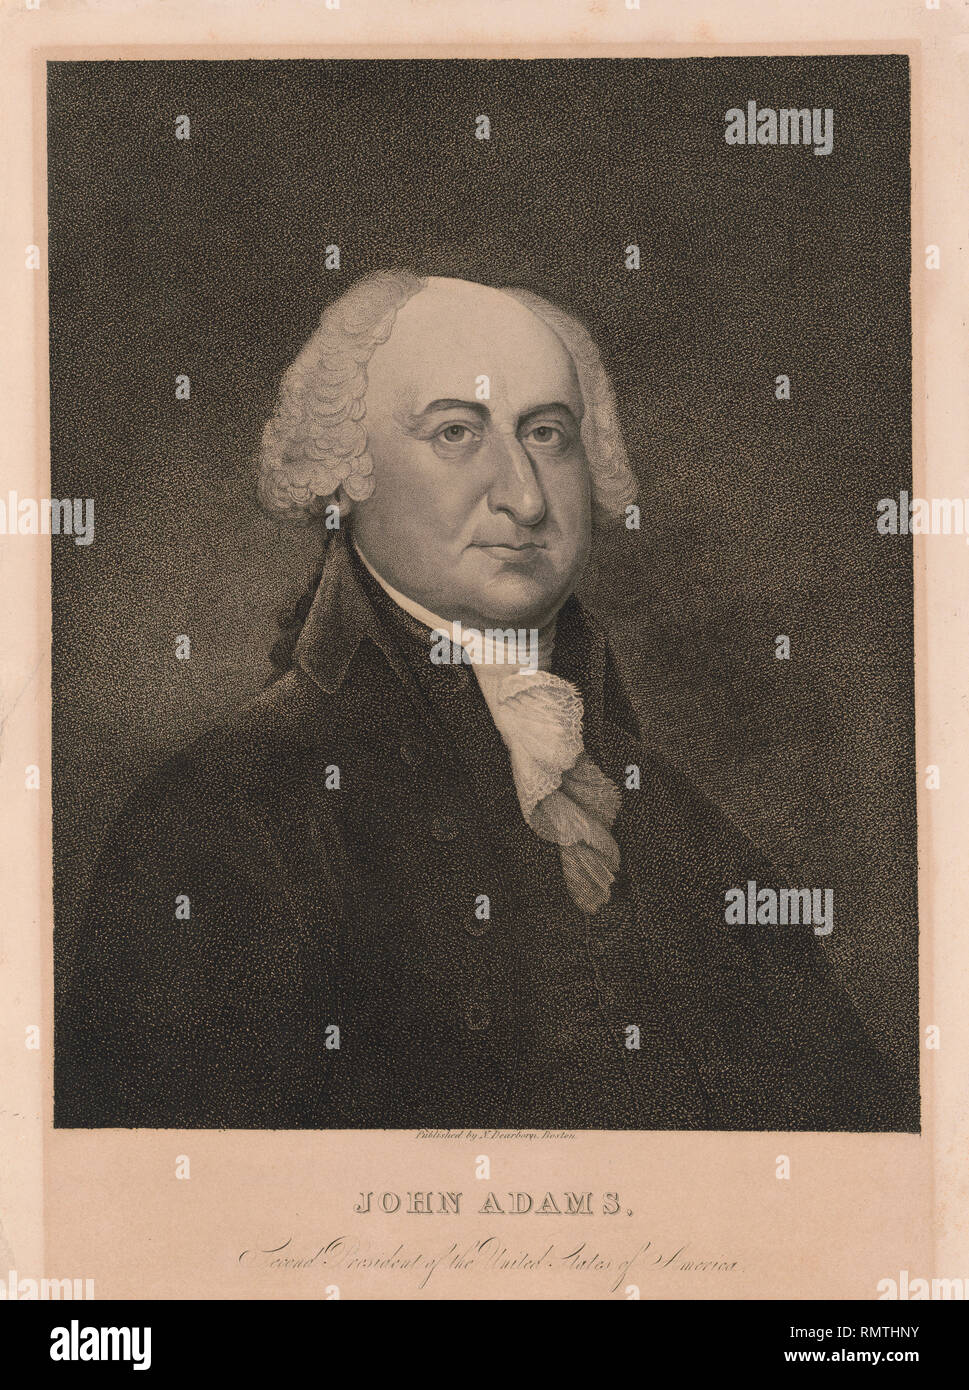 John Adams (1735-1826), Second President of the United States, Head and Shoulders Portrait, Published by N. Dearborn, Boston Stock Photo